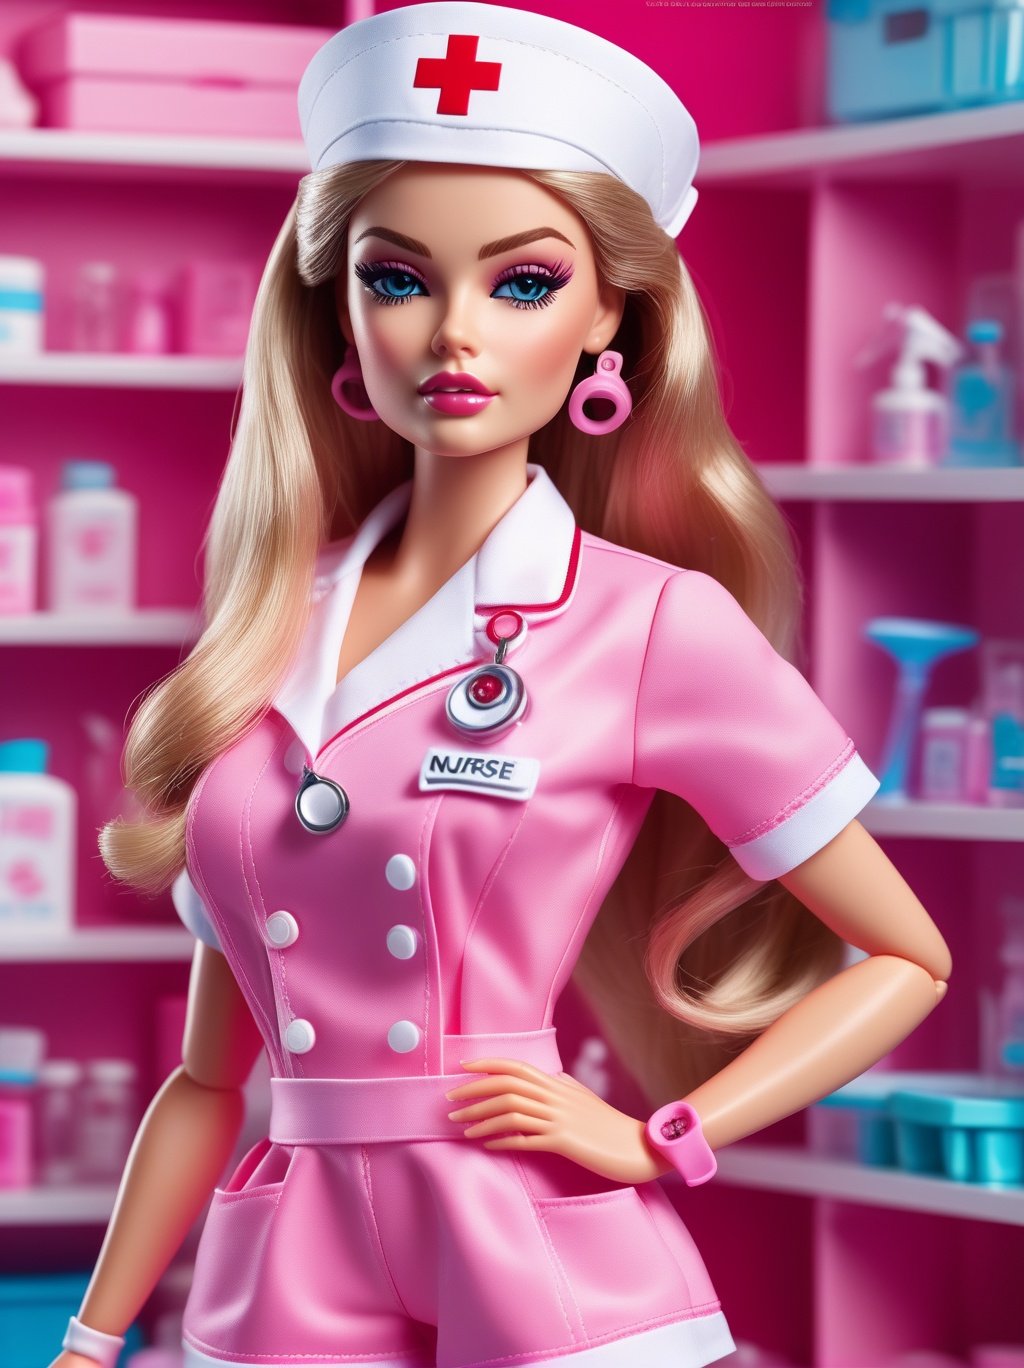 Ultra high resolution, high resolution, (masterpiece: 1.4), hyper-detail, 1girl, (inboxDollPlaySetQuiron style), full body, no humans, doll, toy, barbie, in a gift box, character print, blonde hair, middle length hair, blight blue eyes, (((wearing a detailed pink theme nurse outfit and matching accessories:1.5))), pink sparkles, sprinkles, barbie pink color theme, beautiful female barbie, full lips, parted_lips, heavy make-up, smoky eyes, detailed eyes, pretty face,3DMM,inboxDollPlaySetQuiron style,(Mila Kunis:1.3),  <lyco:SDXL1.0_quiron_inboxDollPlaySet_v5.1_lycoris:0.97>